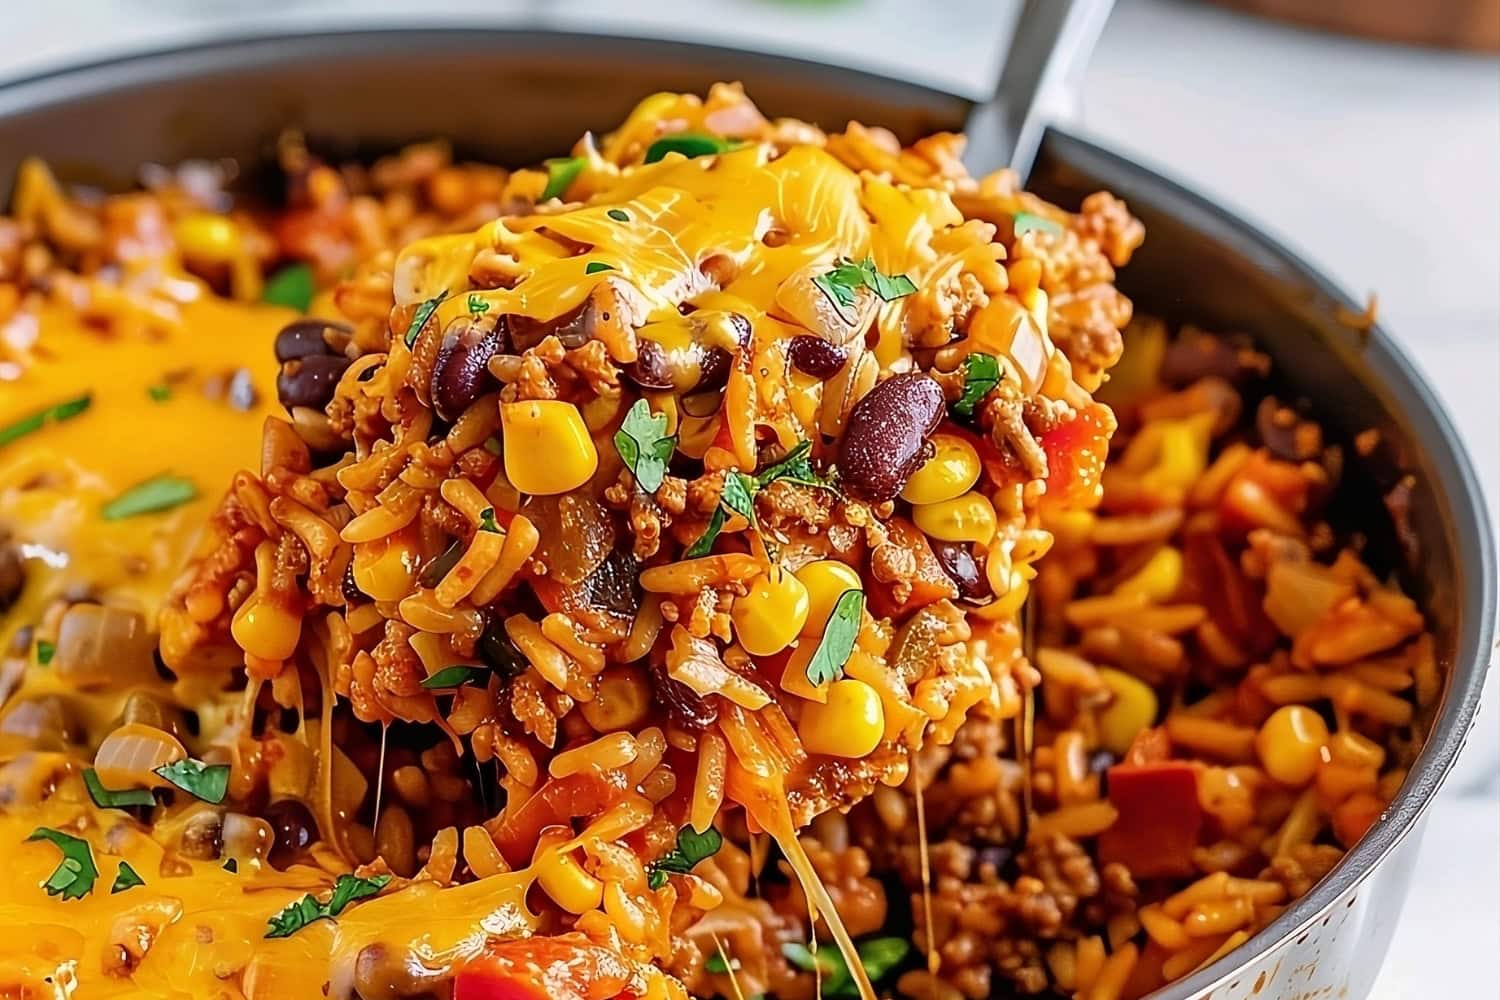 Cheesy Mexican rice casserole in a pan.